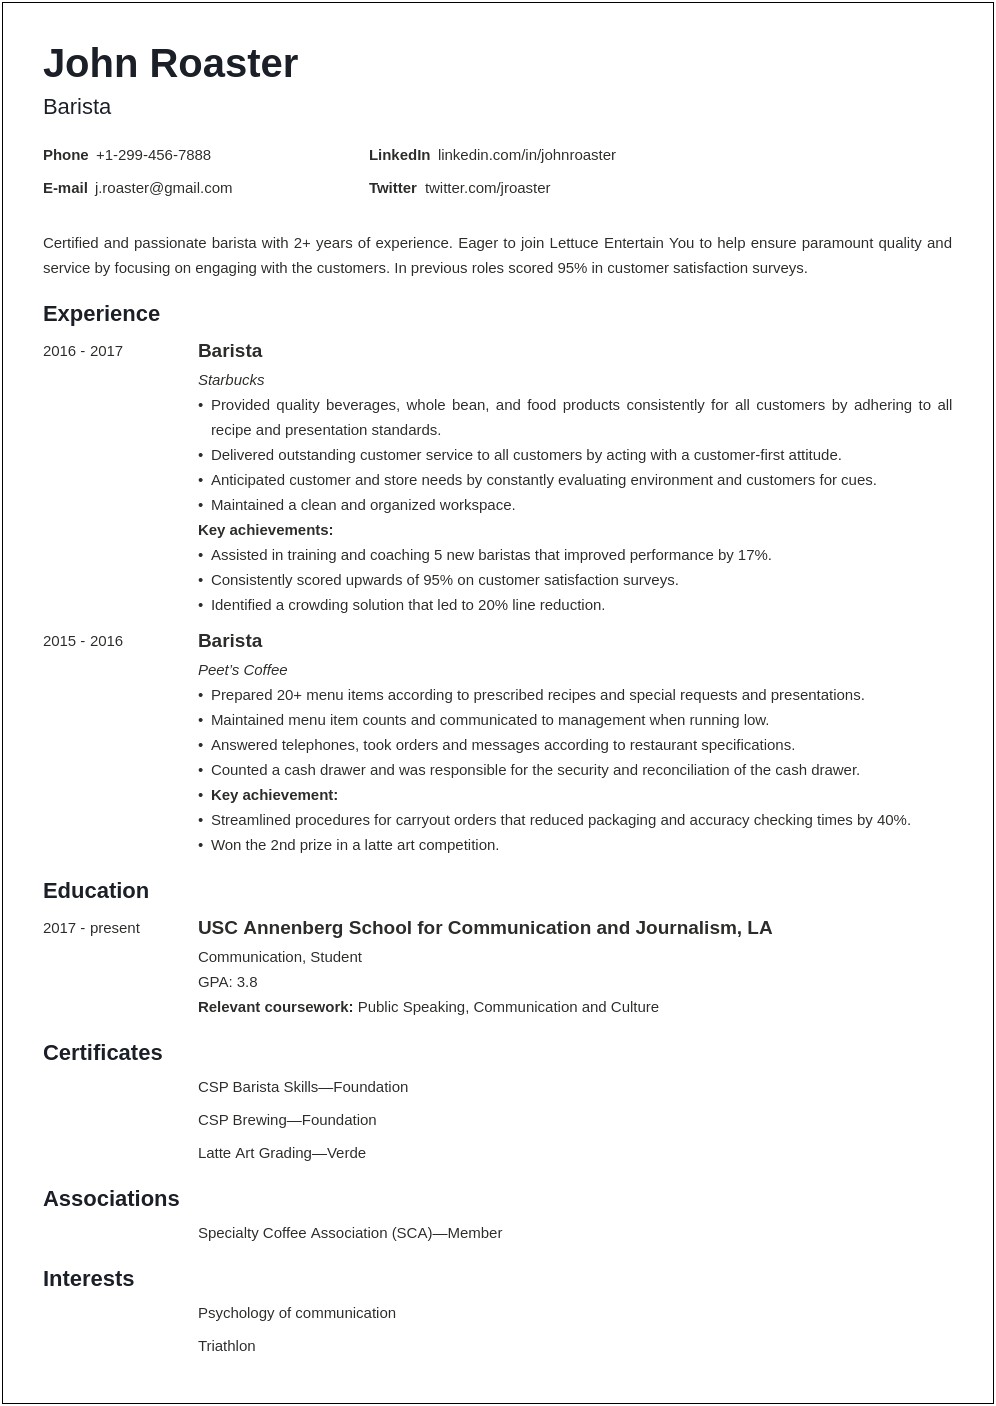 Extra Curricular Activities On Resume Example